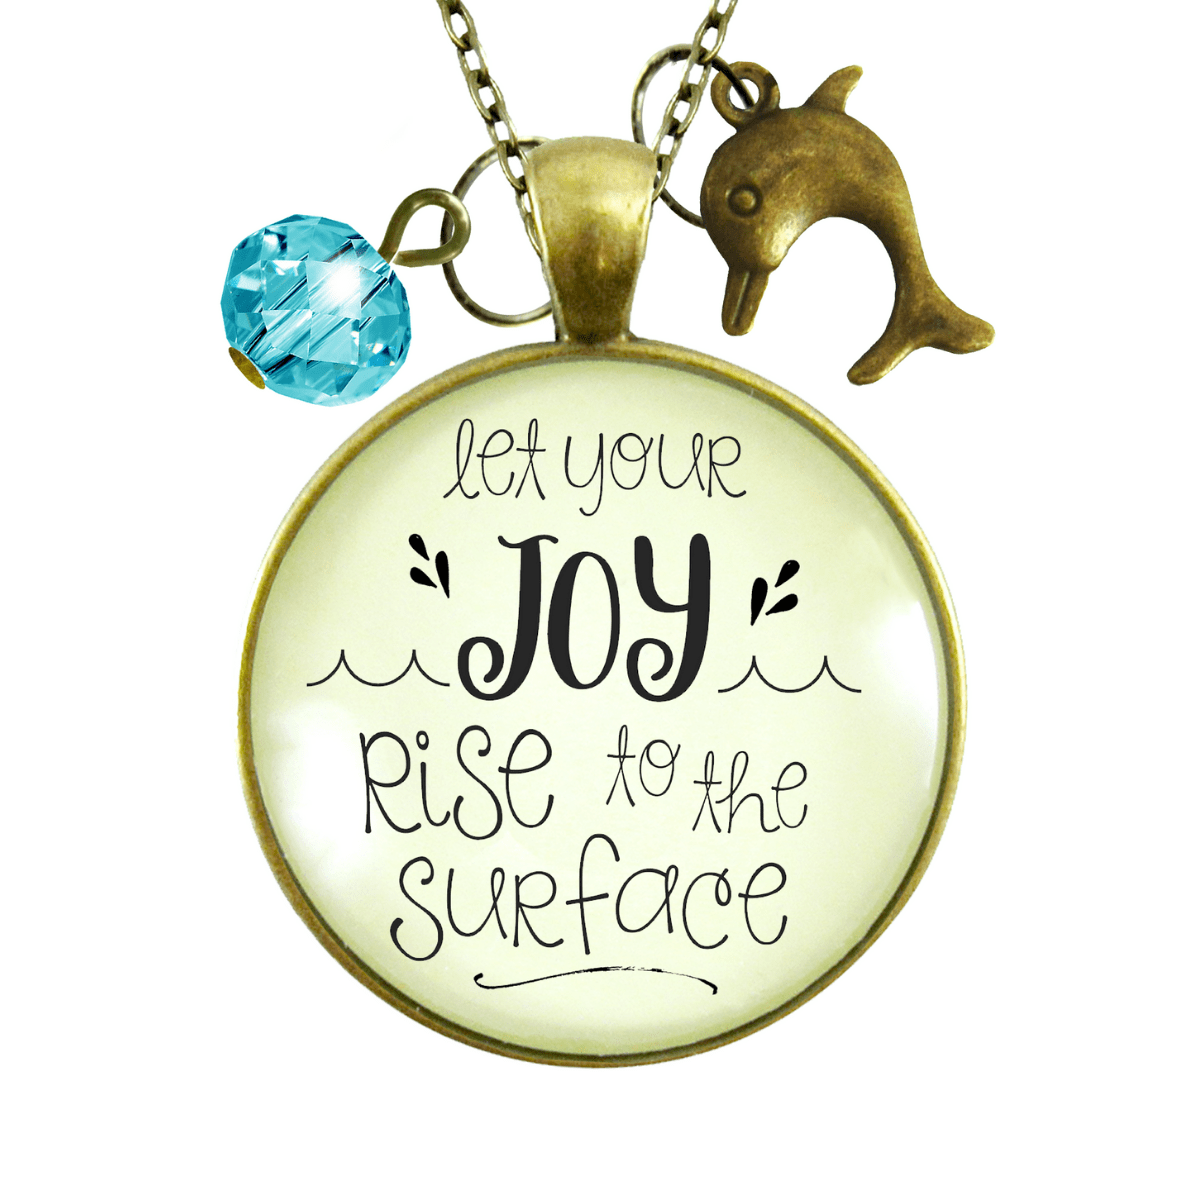 Gutsy Goodness Dolphin Necklace Let Your Joy Rise Positive Mantra Jewelry Gift - Gutsy Goodness Handmade Jewelry;Dolphin Necklace Let Your Joy Rise Positive Mantra Jewelry Gift - Gutsy Goodness Handmade Jewelry Gifts